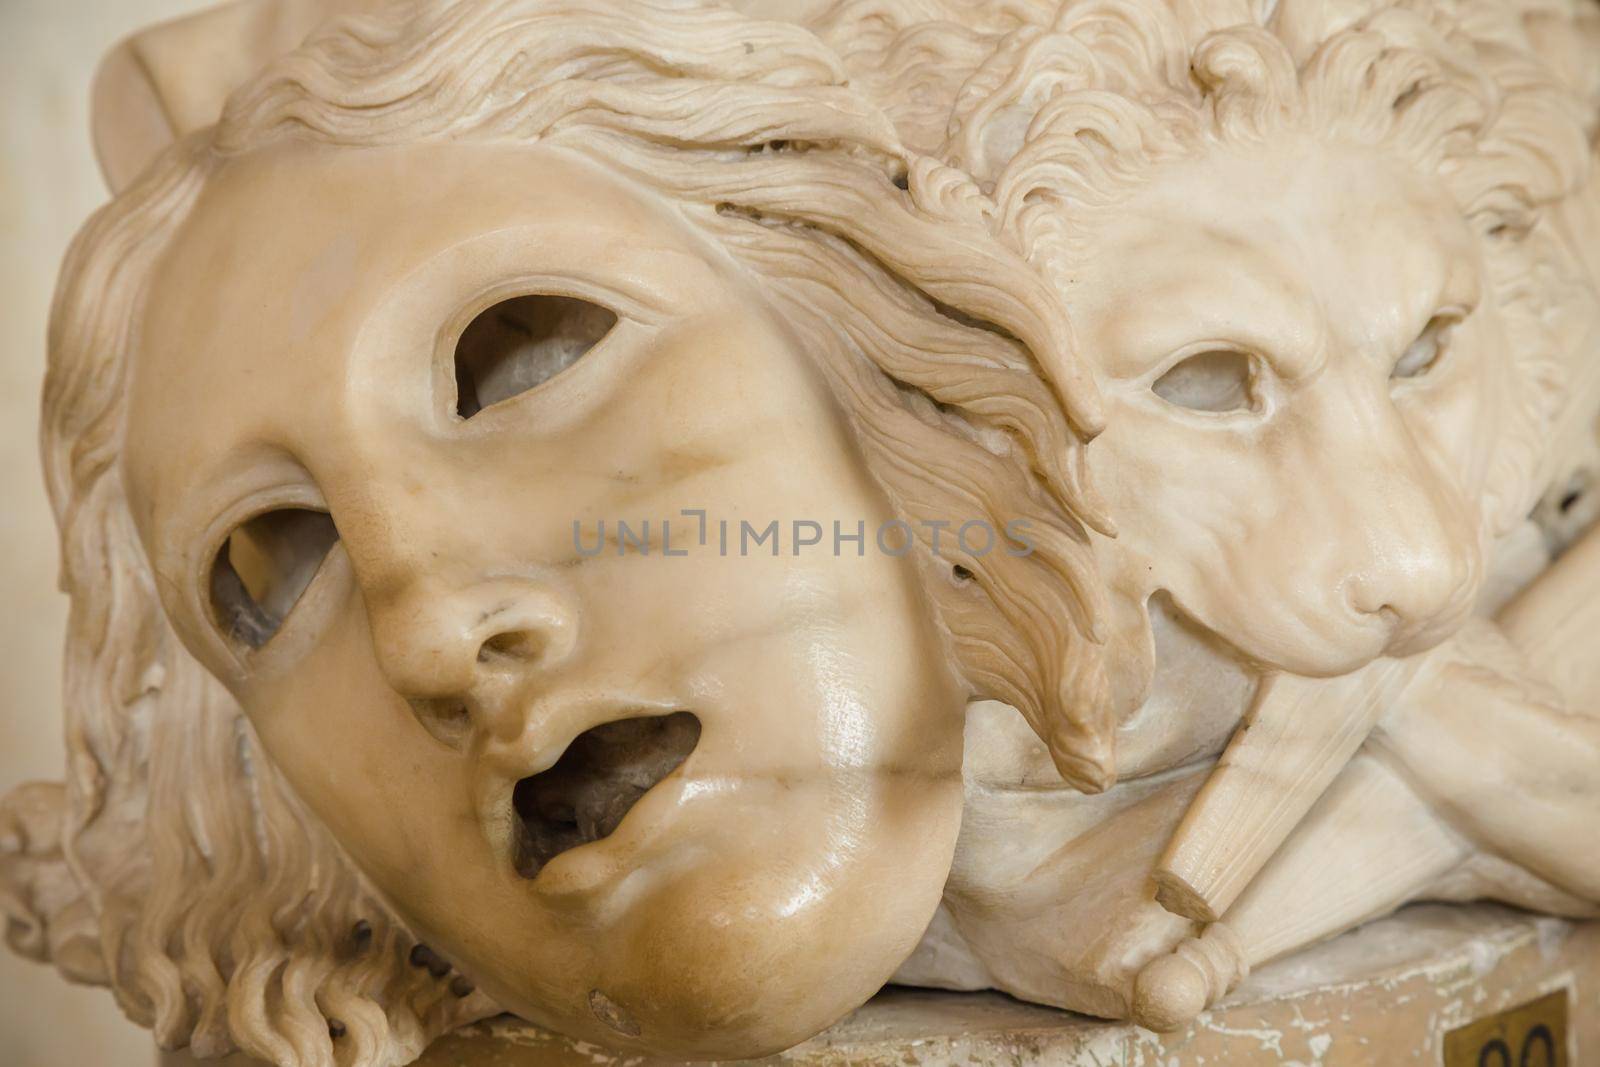 Ancient theatre mask, made of marble, located at the base of a Roman column in Rome - Italy